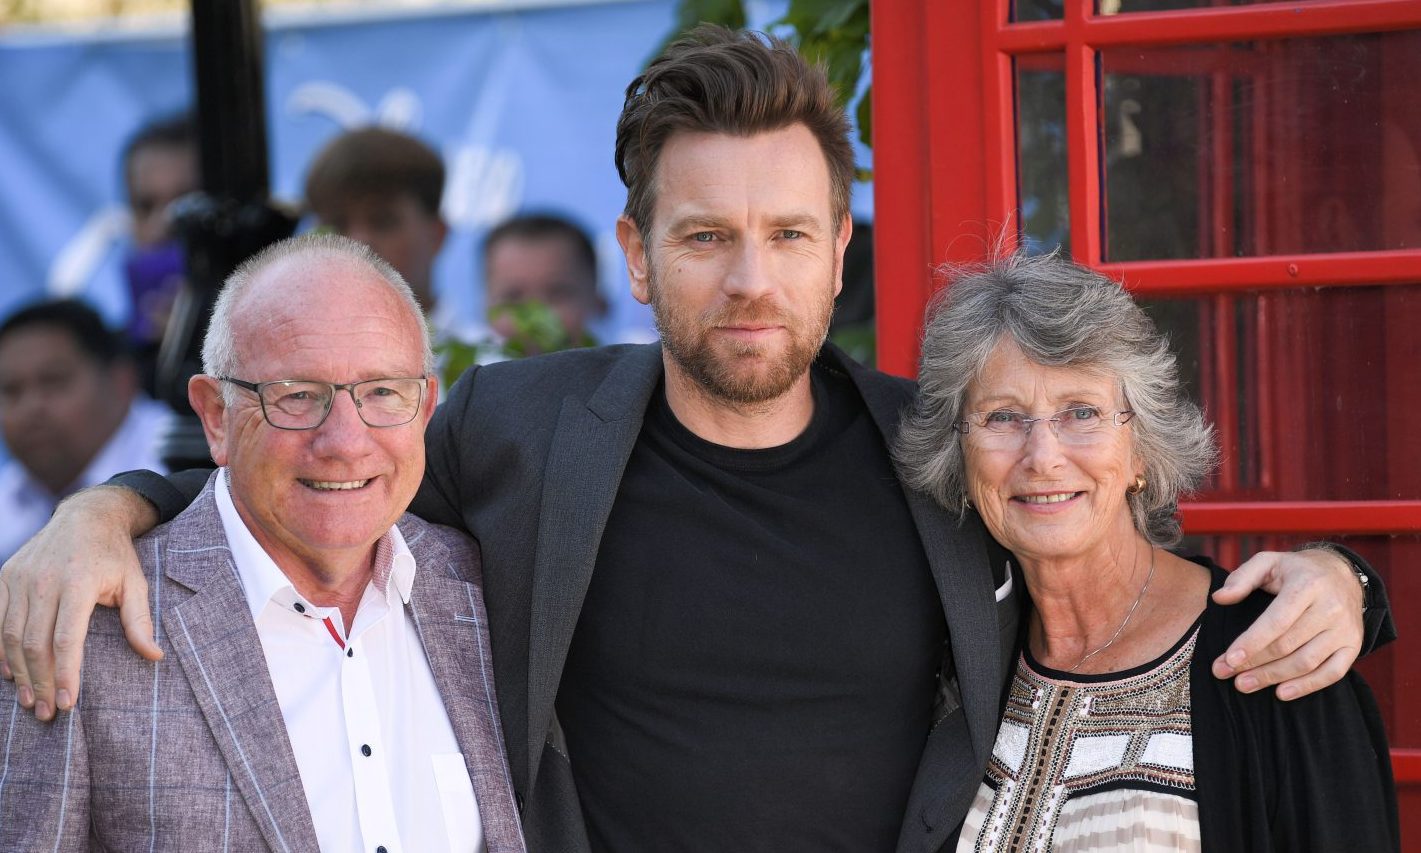 Ewan McGregor with parents Jim and Carol on a red carpet at a film screening.